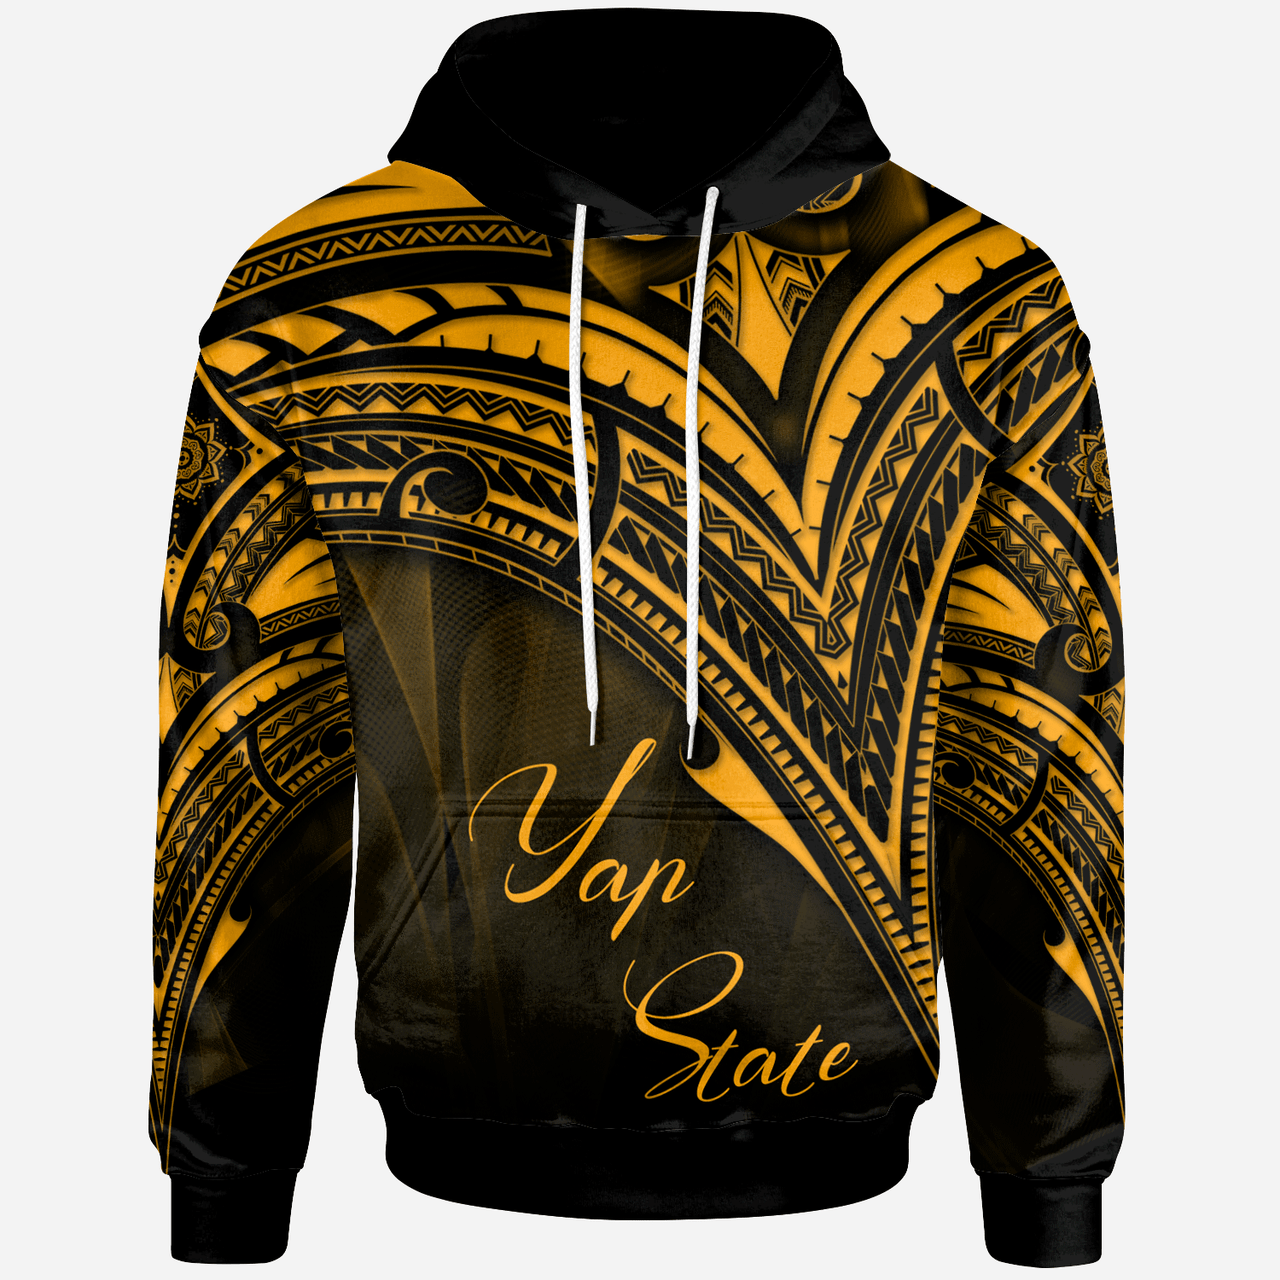 Yap State Hoodie - Gold Color Cross Style